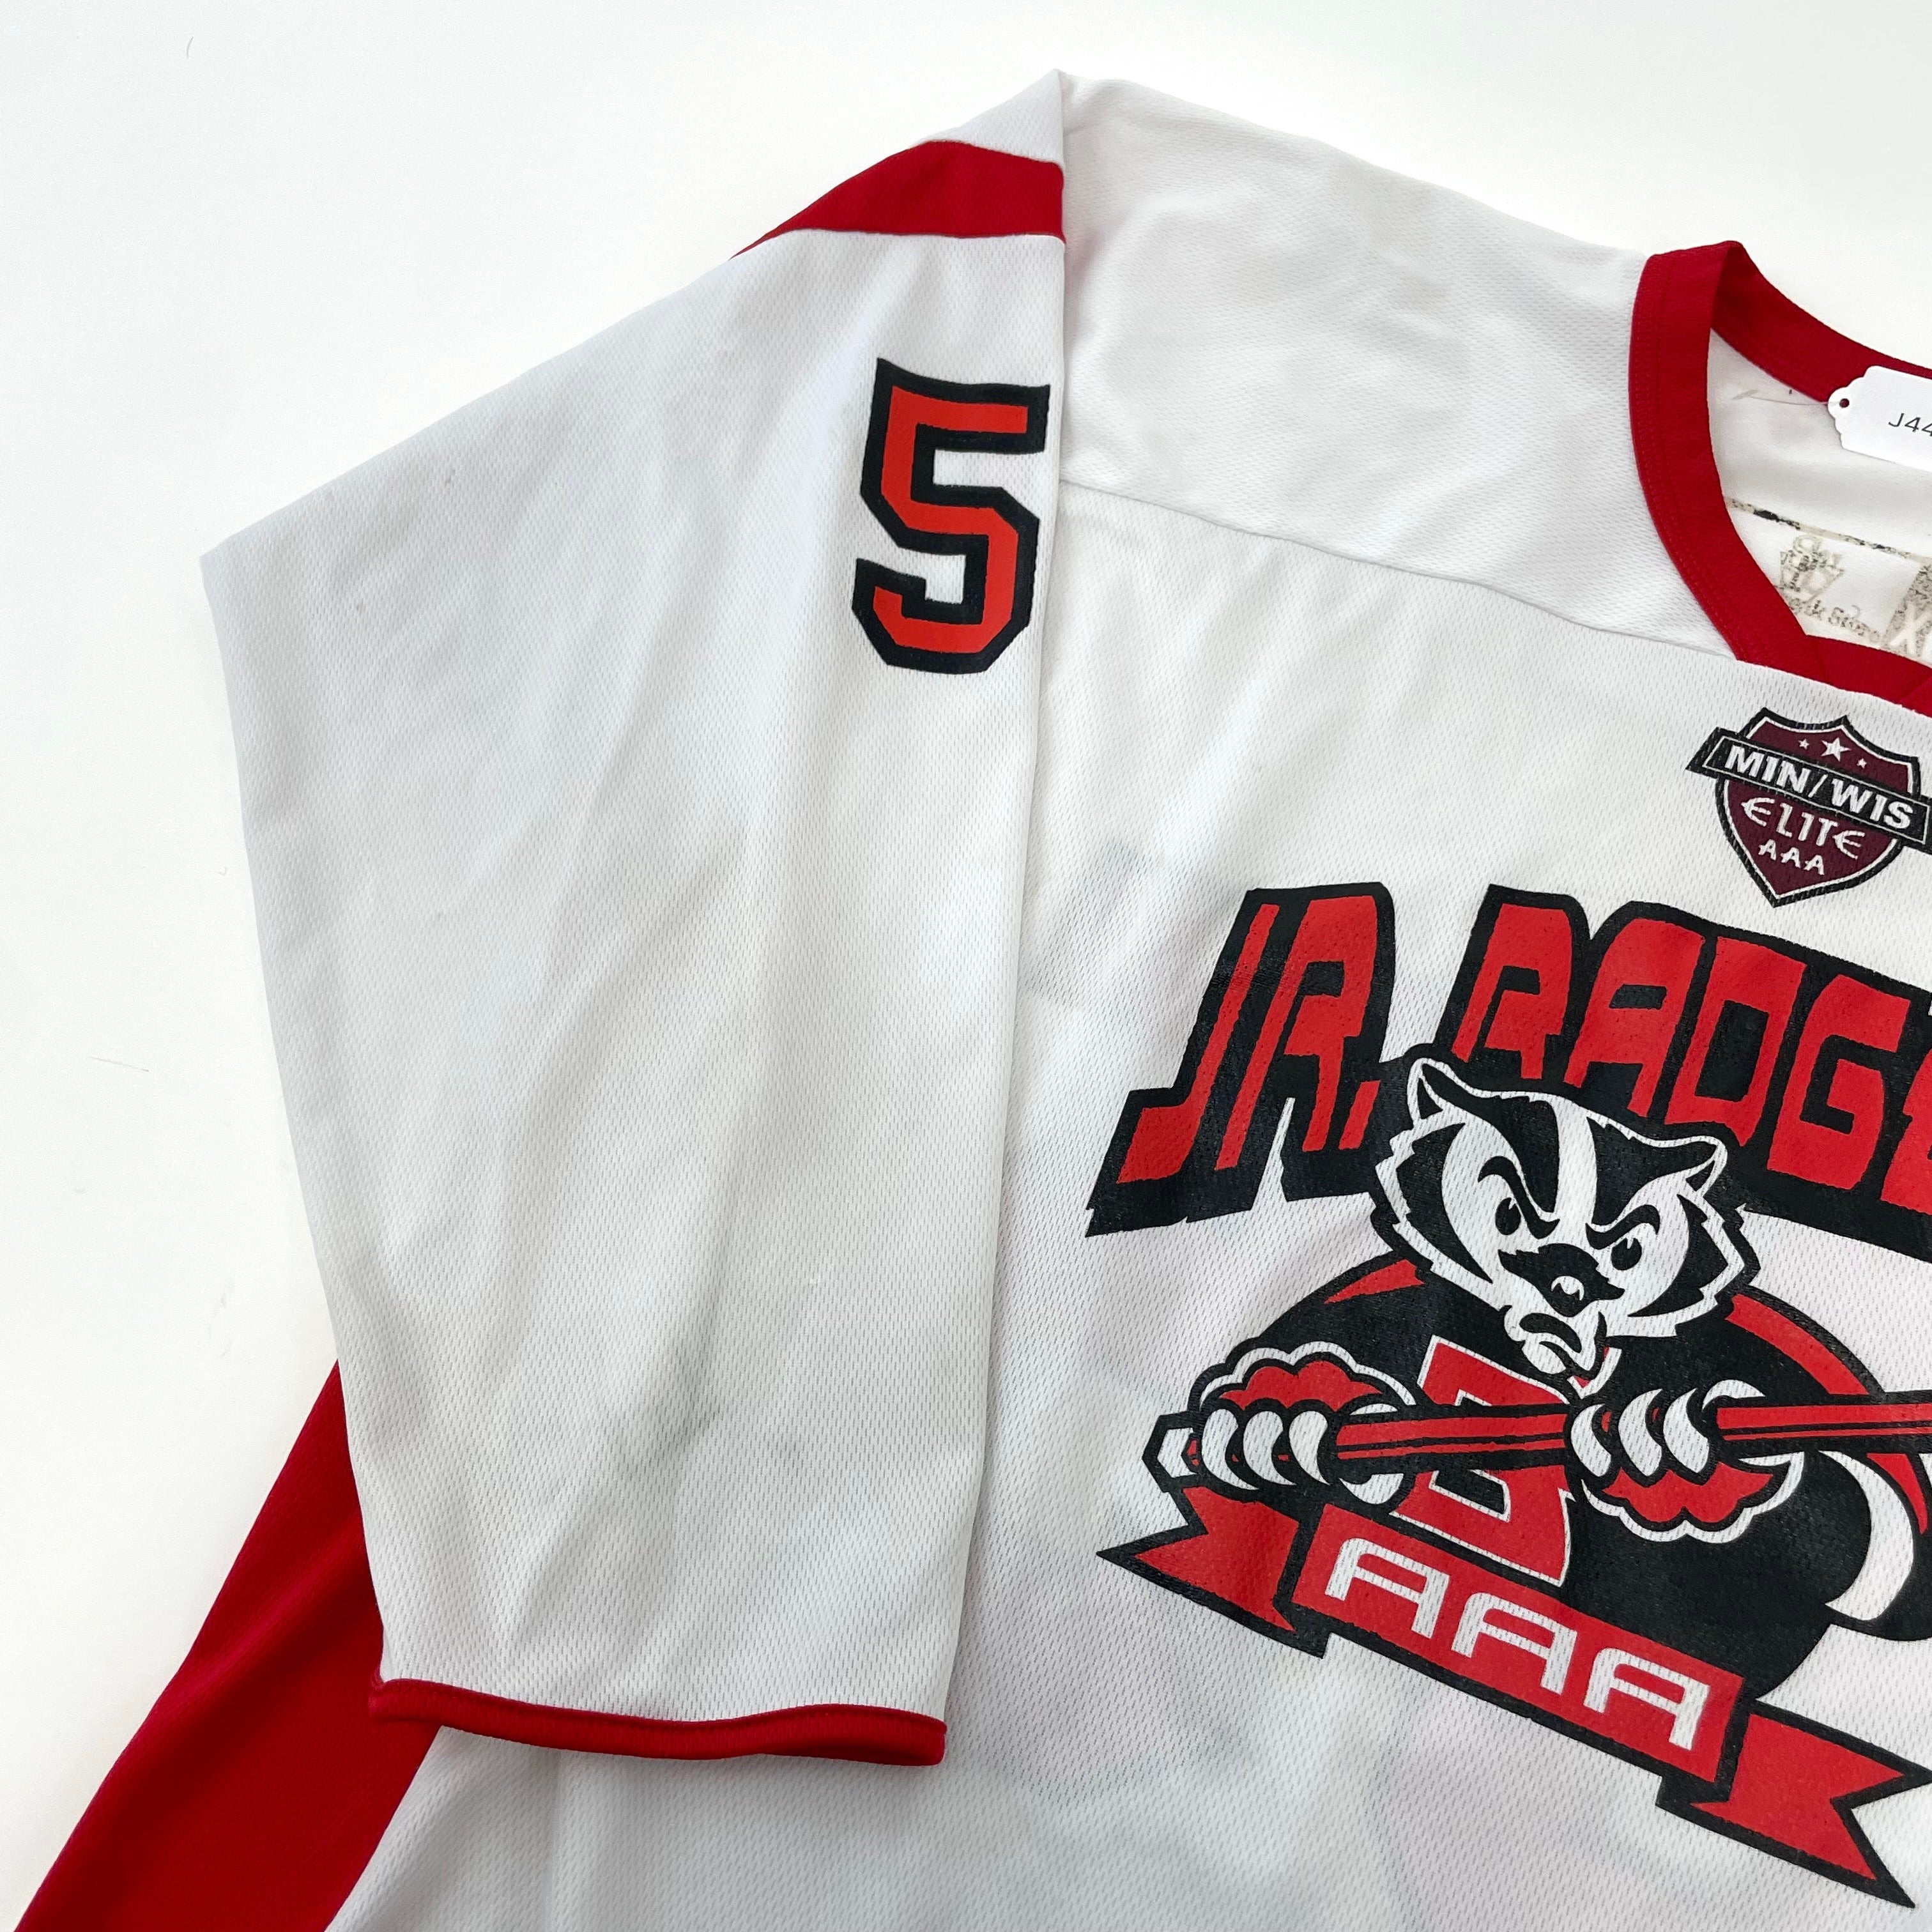 Badger Badger Youth Practice Jersey White XL